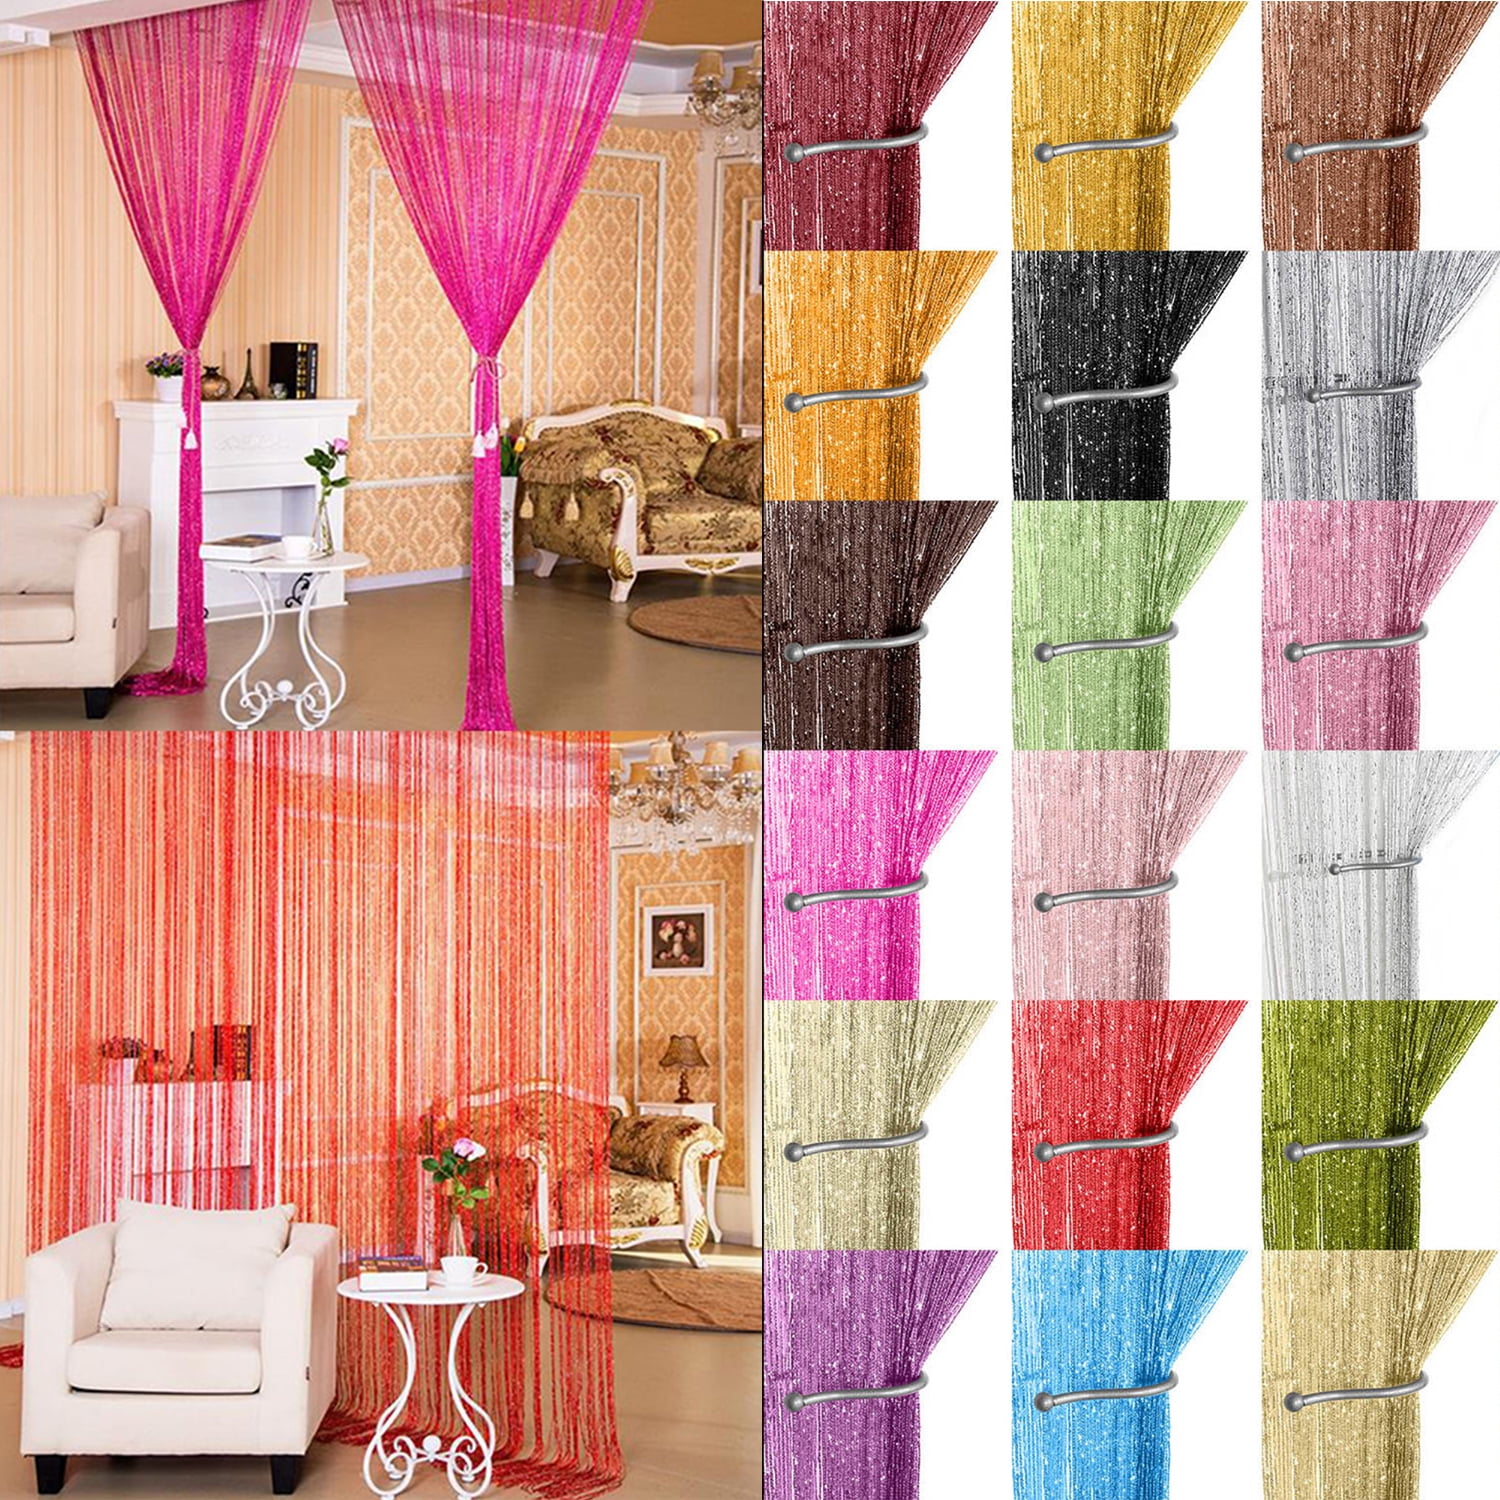 AIFENTE White 2pcs Beaded String Hanging Curtain Glazed Beads Curtain Panels String Closet Curtain Closet Door or Divider Curtain Fringe Tassel for Wall Wedding Decor Home Decoration 39.37x78.74 inch 